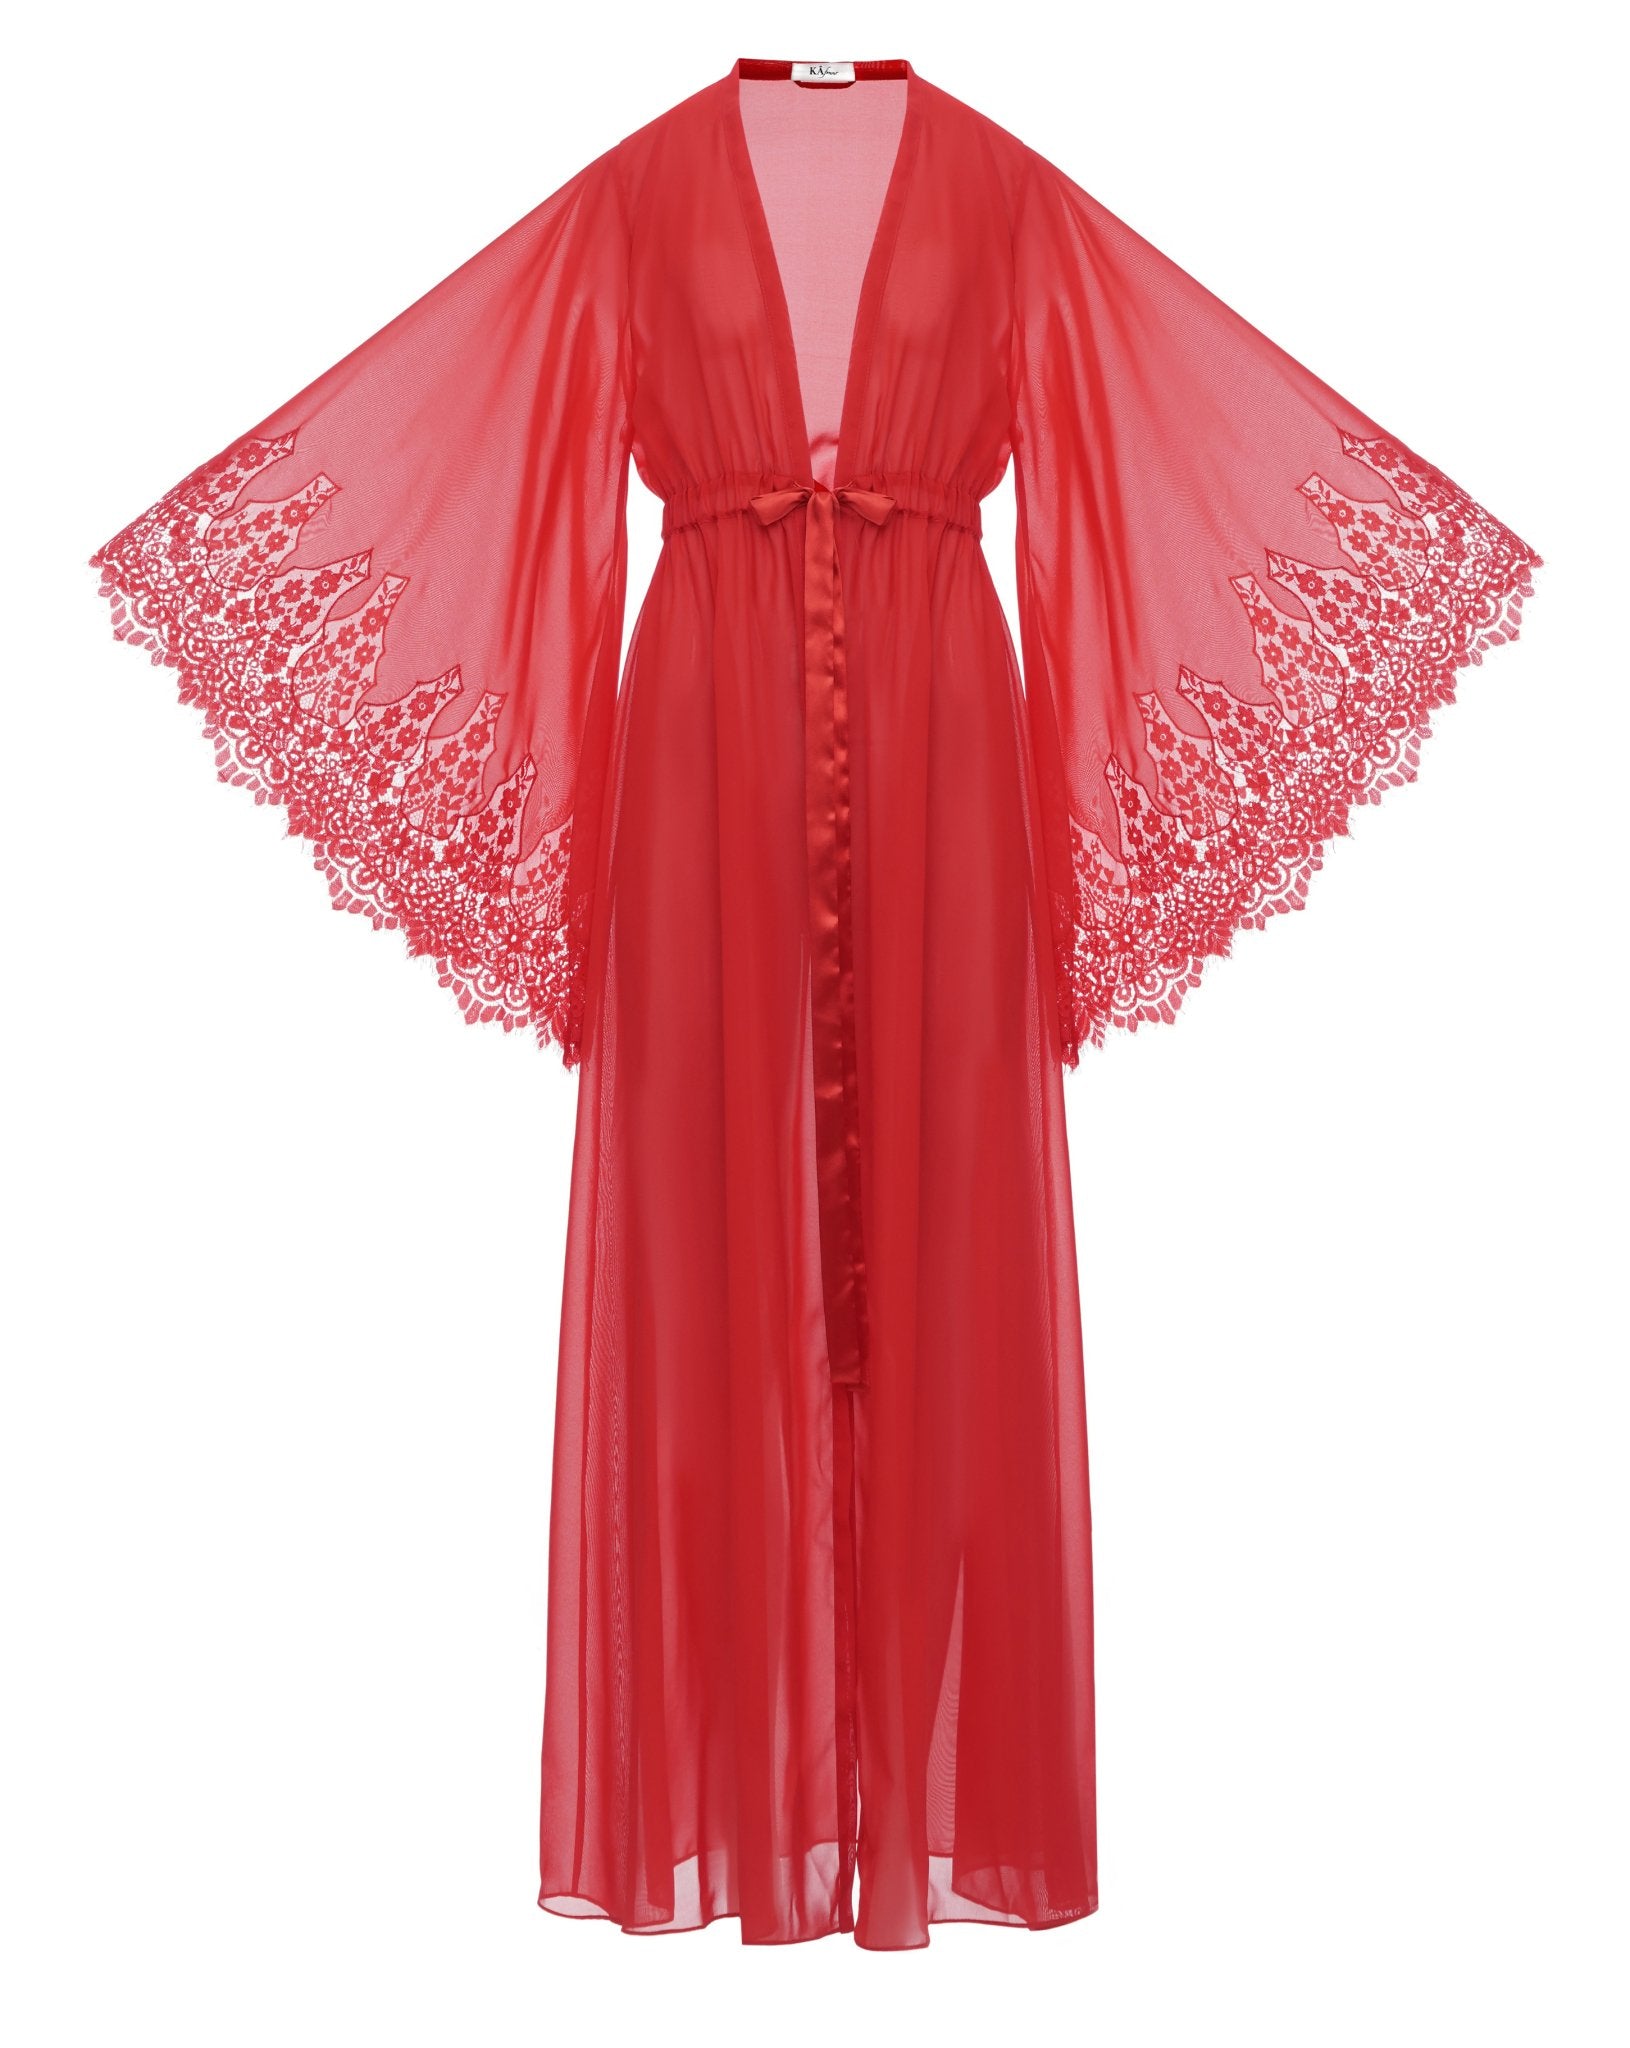 Silky Affair Sheer Lace Trim Robe - Red